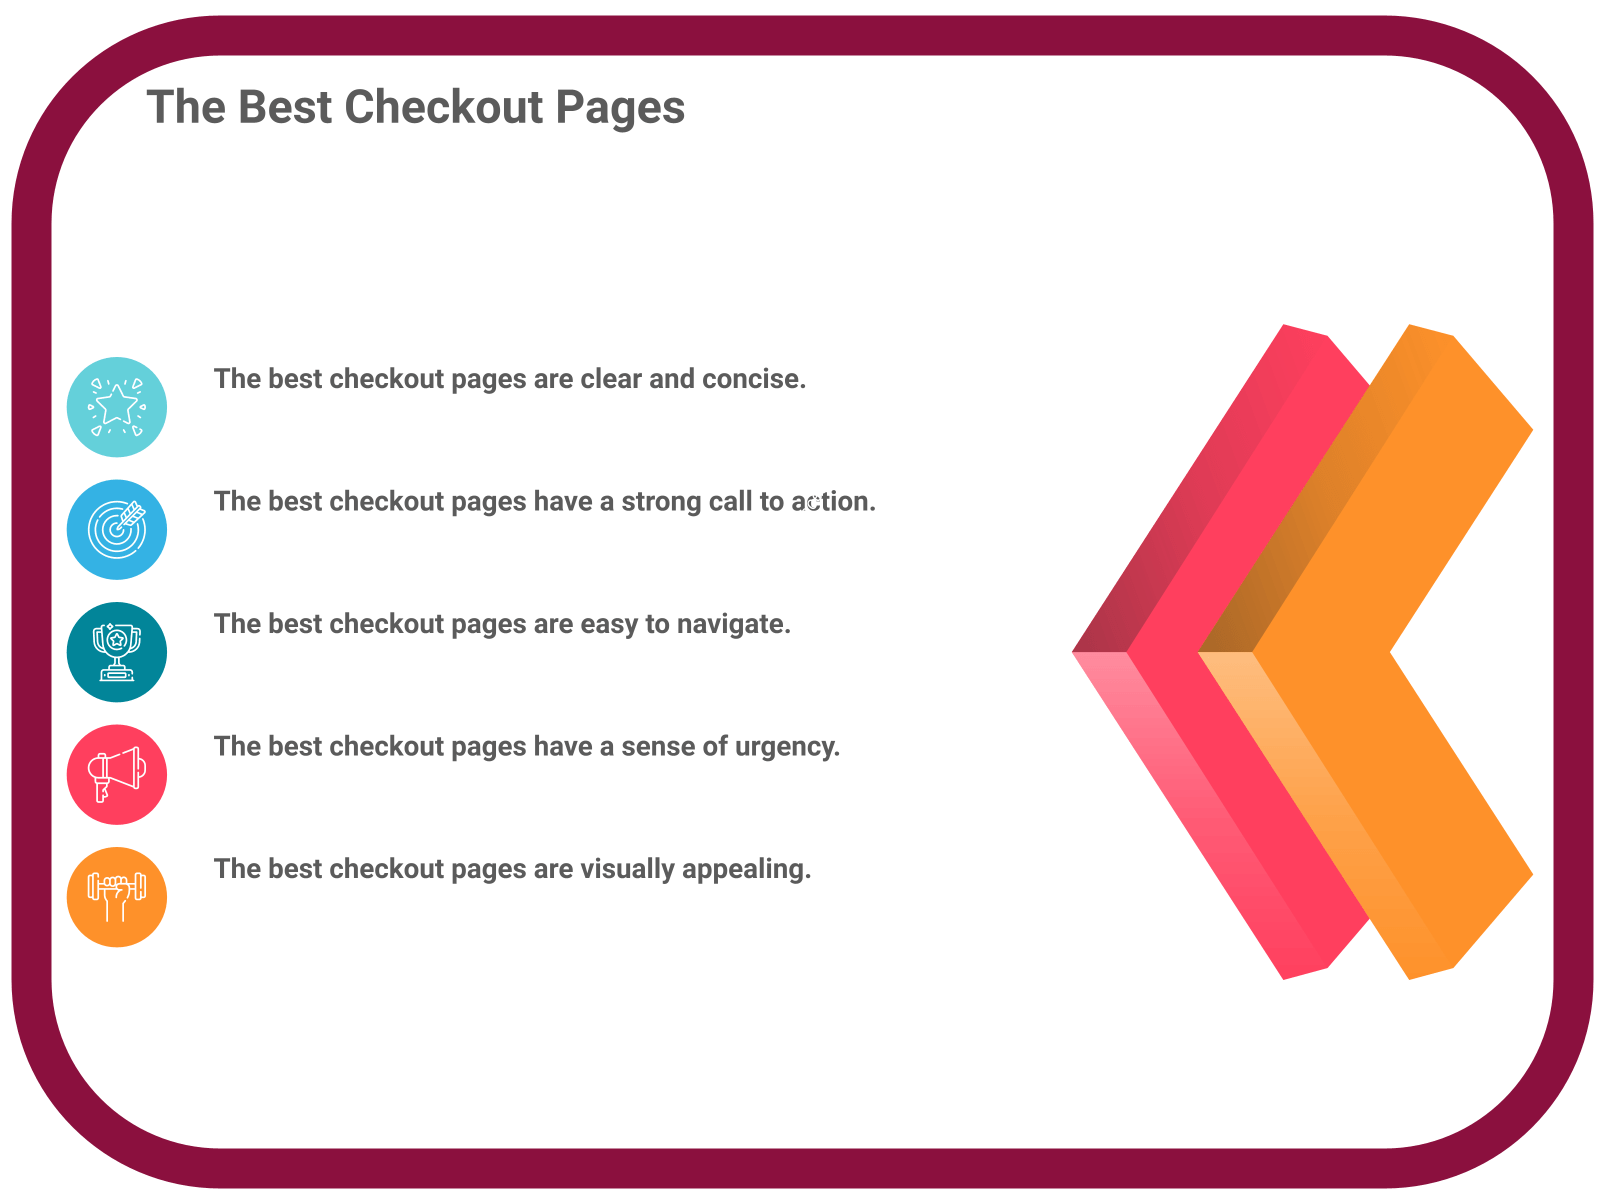 INFOGRAPHIC: The Best Checkout Pages - Poll the People